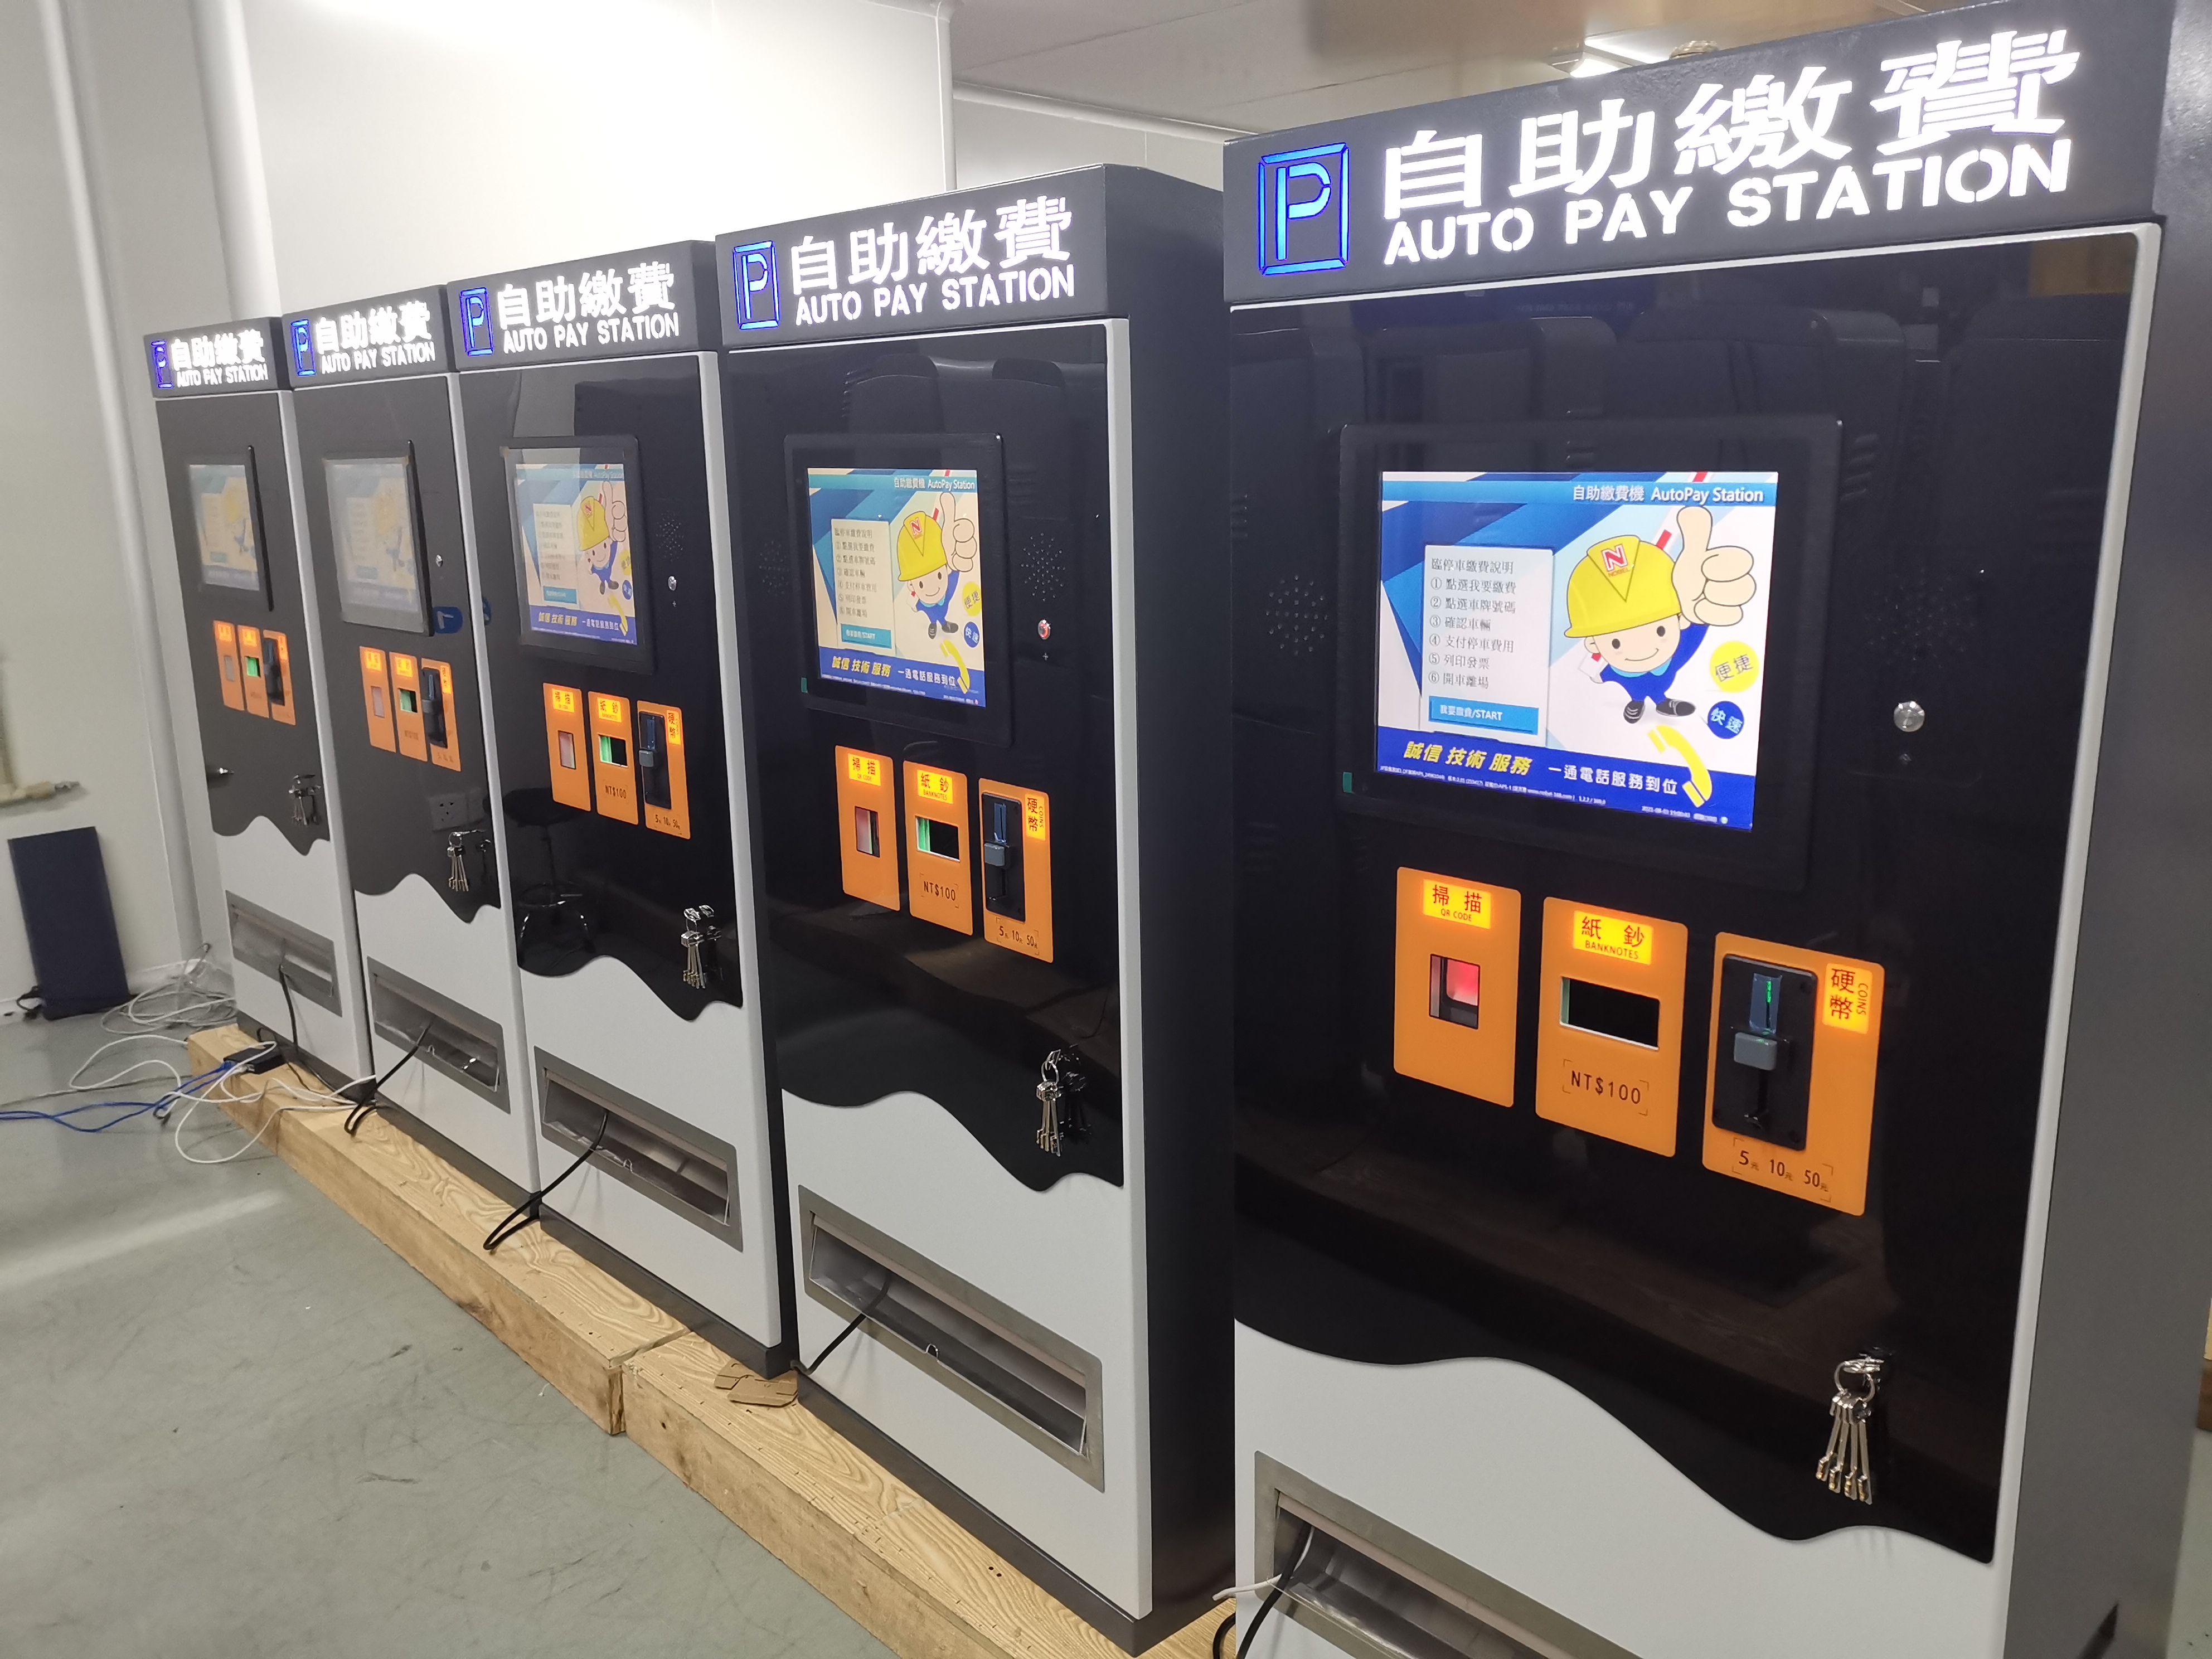 LPR Smart Card Paper Tickets Parking System Automated Parking Pay Stations APS-X5 from excelsoo expark